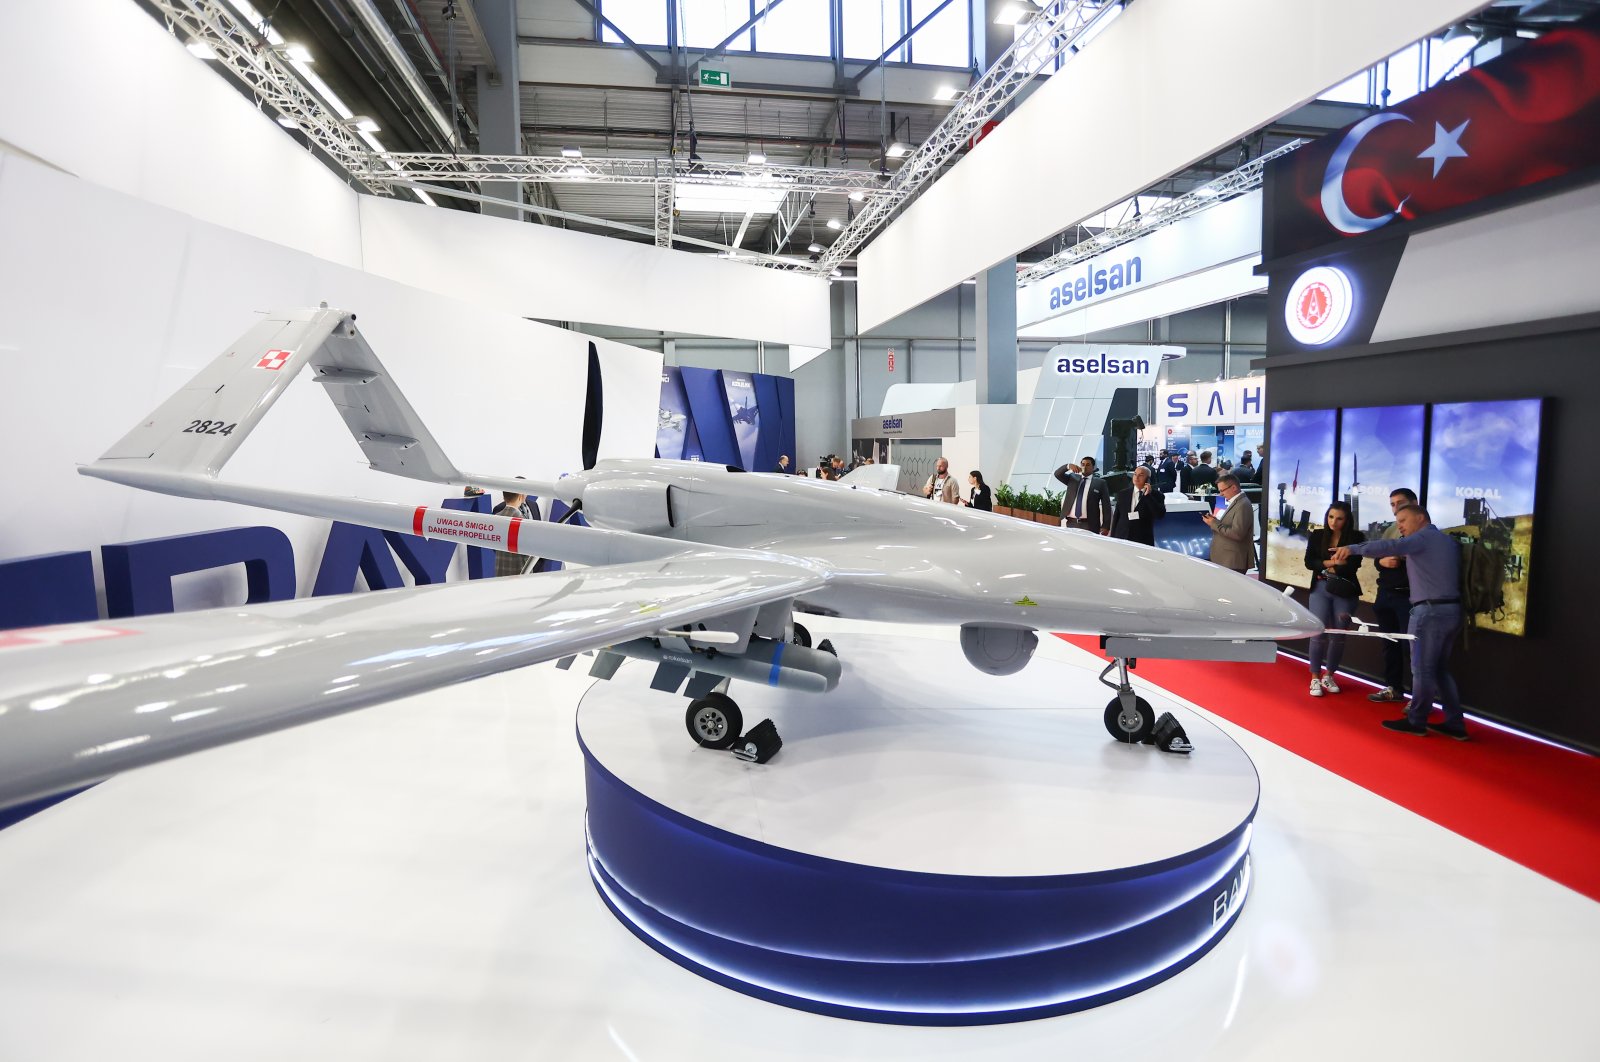 A Bayraktar TB2 drone is seen inside a hall of the 30th international Defence Industry Exhibition in Kielce, Poland, Sept. 6, 2022. (AA Photo)